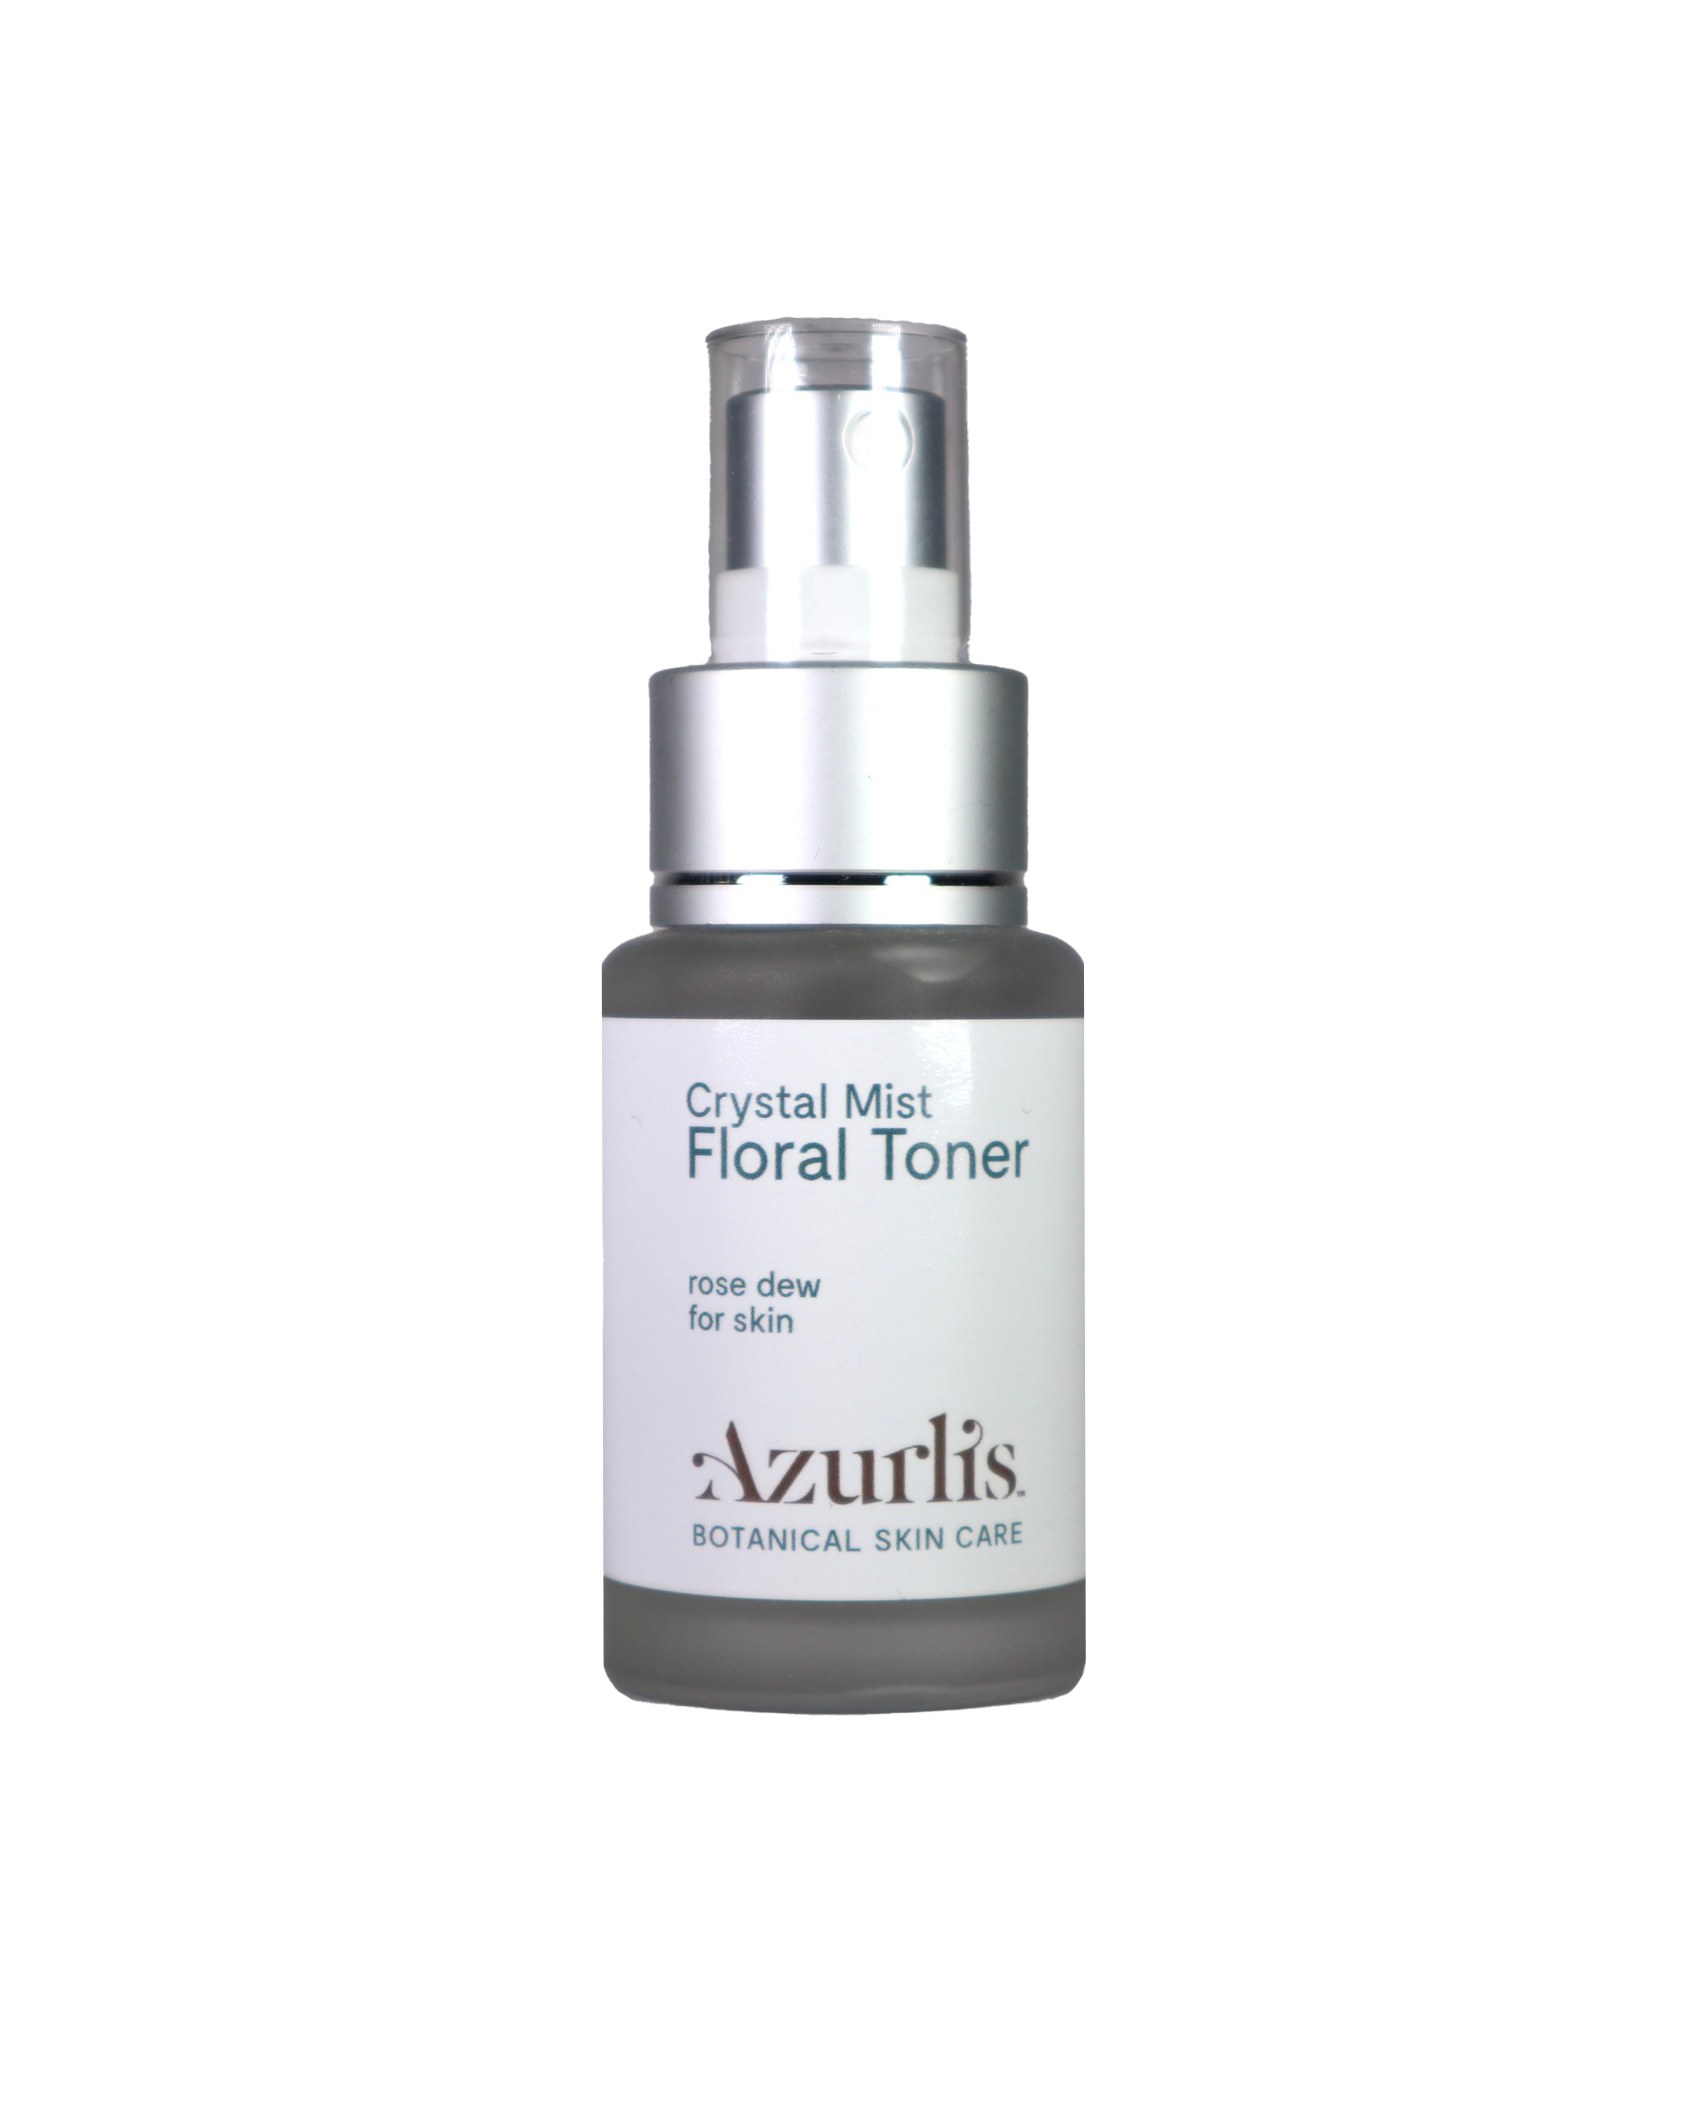 Azurlis™ Crystal Mist Floral Toner 50ml is a really unique product that can be used on your face and body, anywhere, anytime, as a toner or spritzer, and is absolutely 100% alcohol-free.